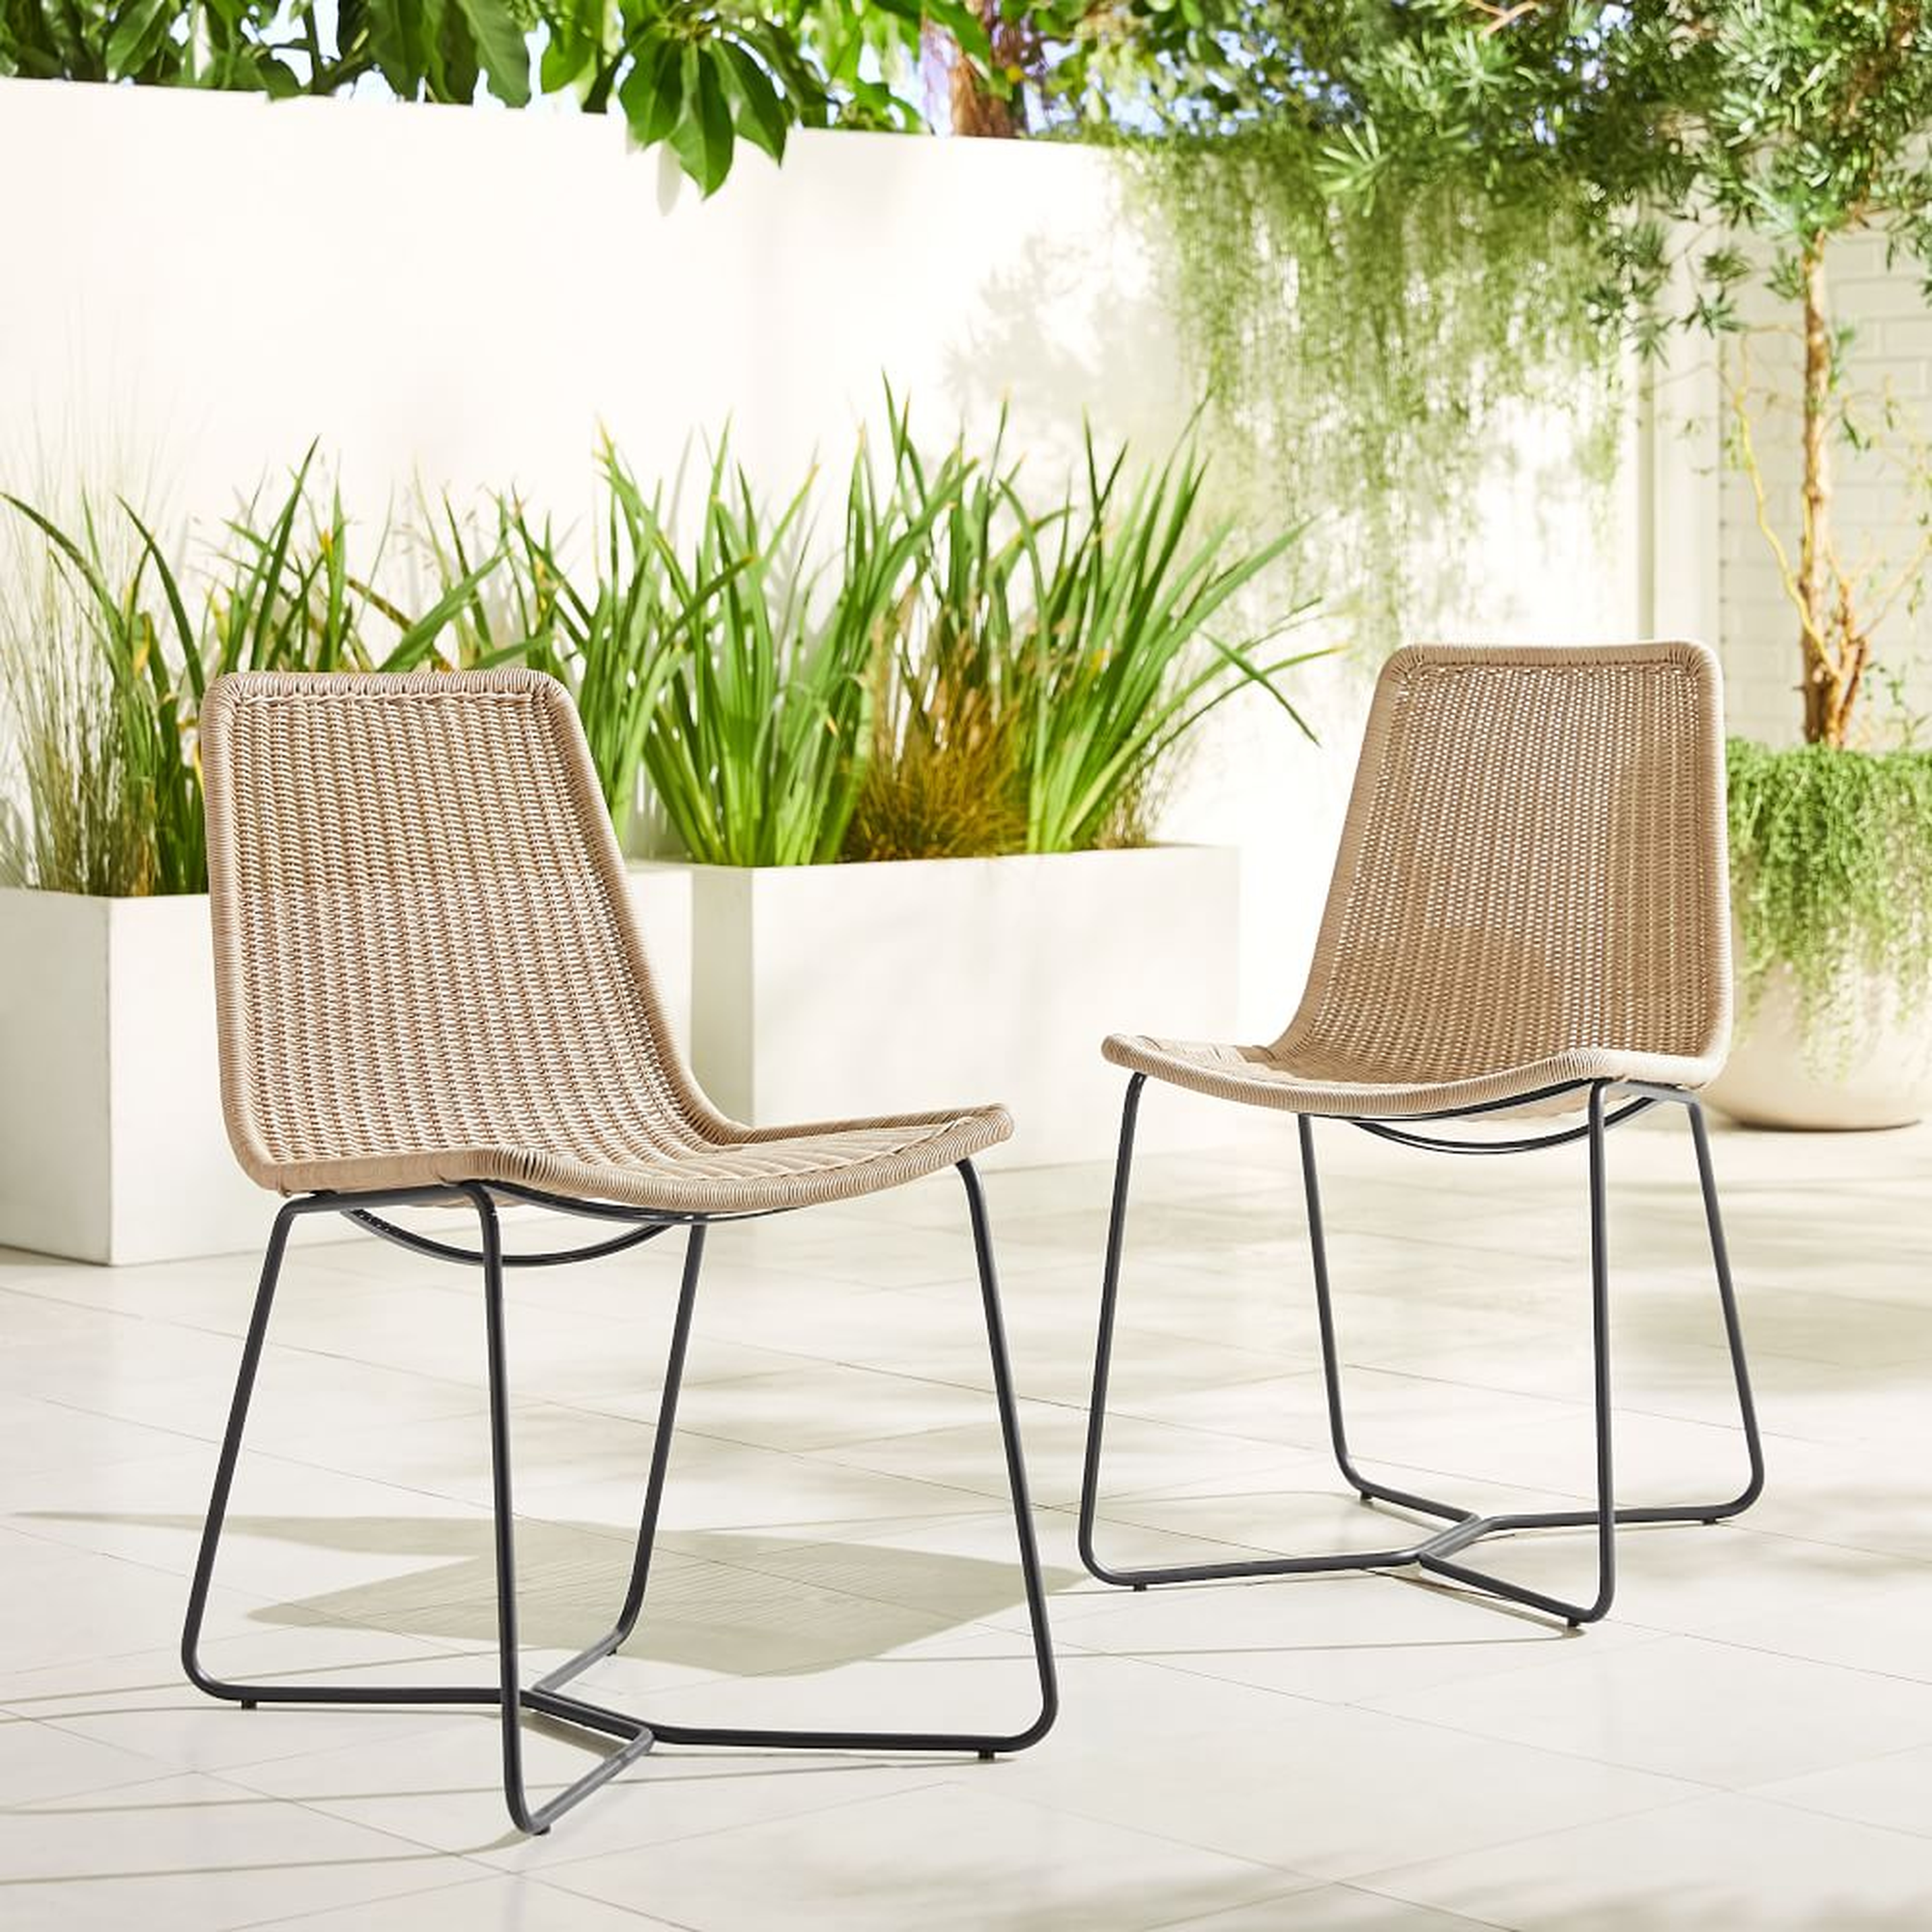 Slope Outdoor Dining Chair, Natural, Set of 6 - West Elm